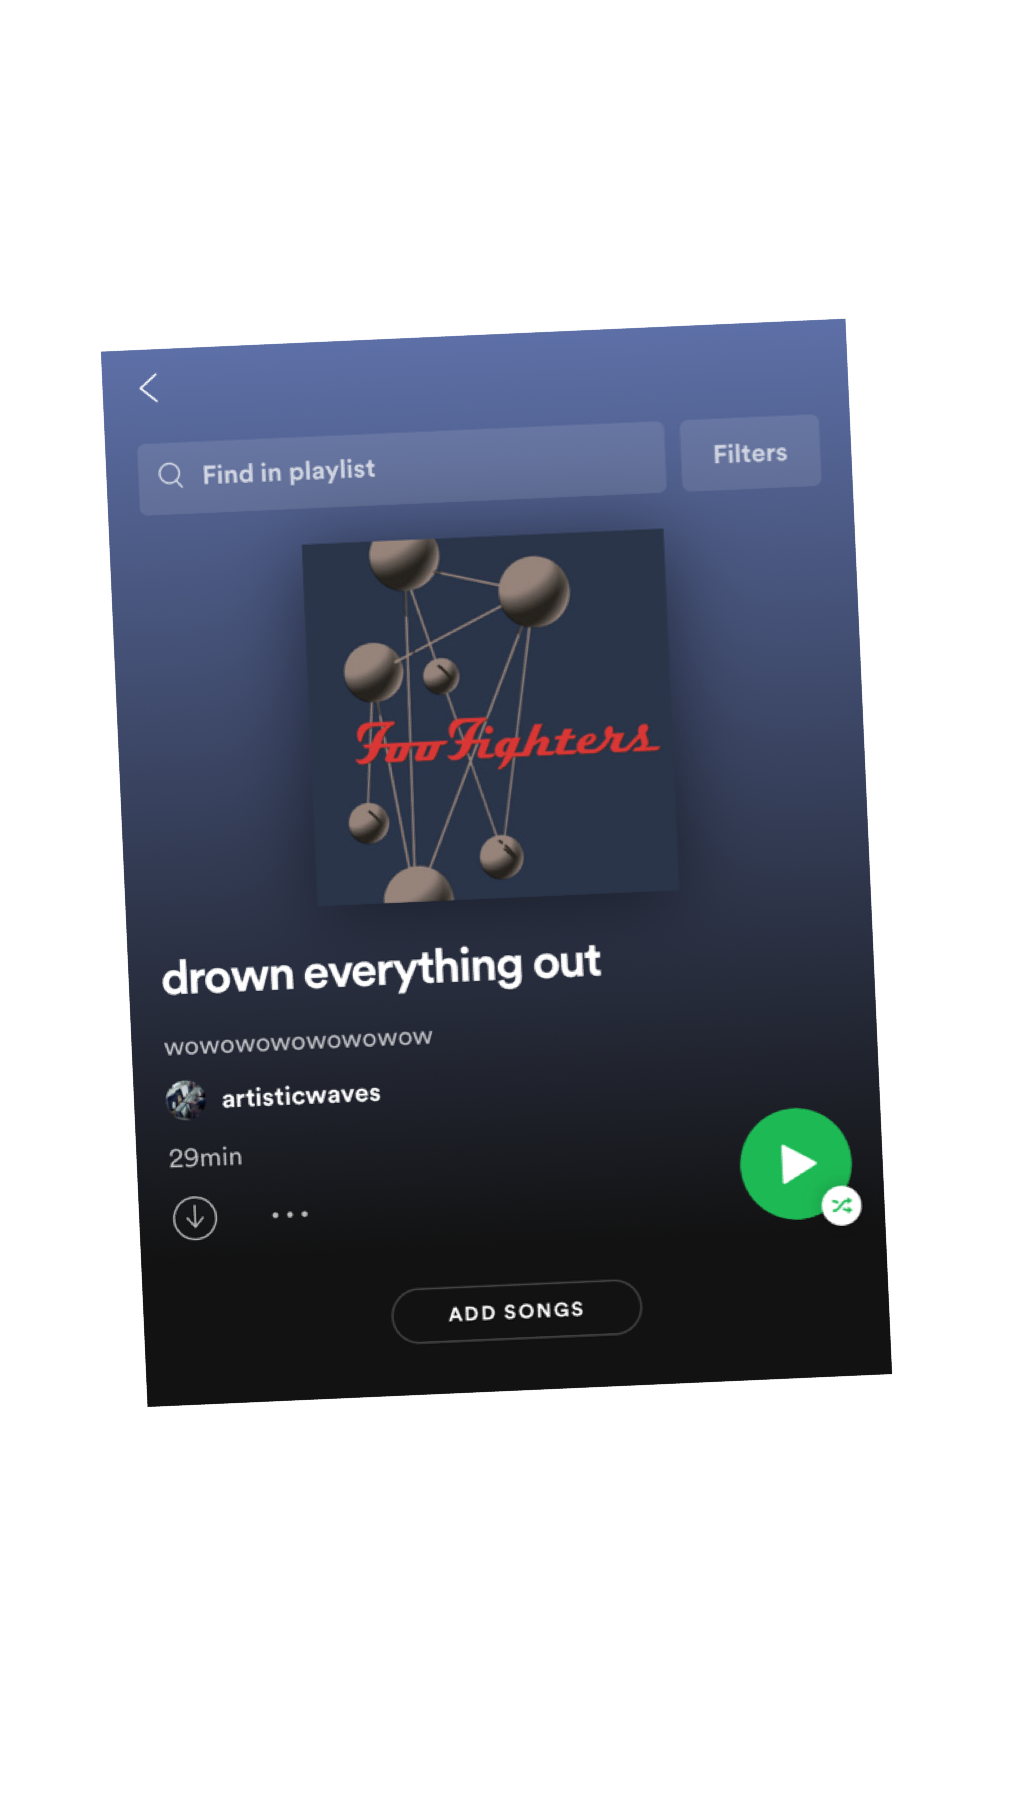 wow what’s this Spotify updated